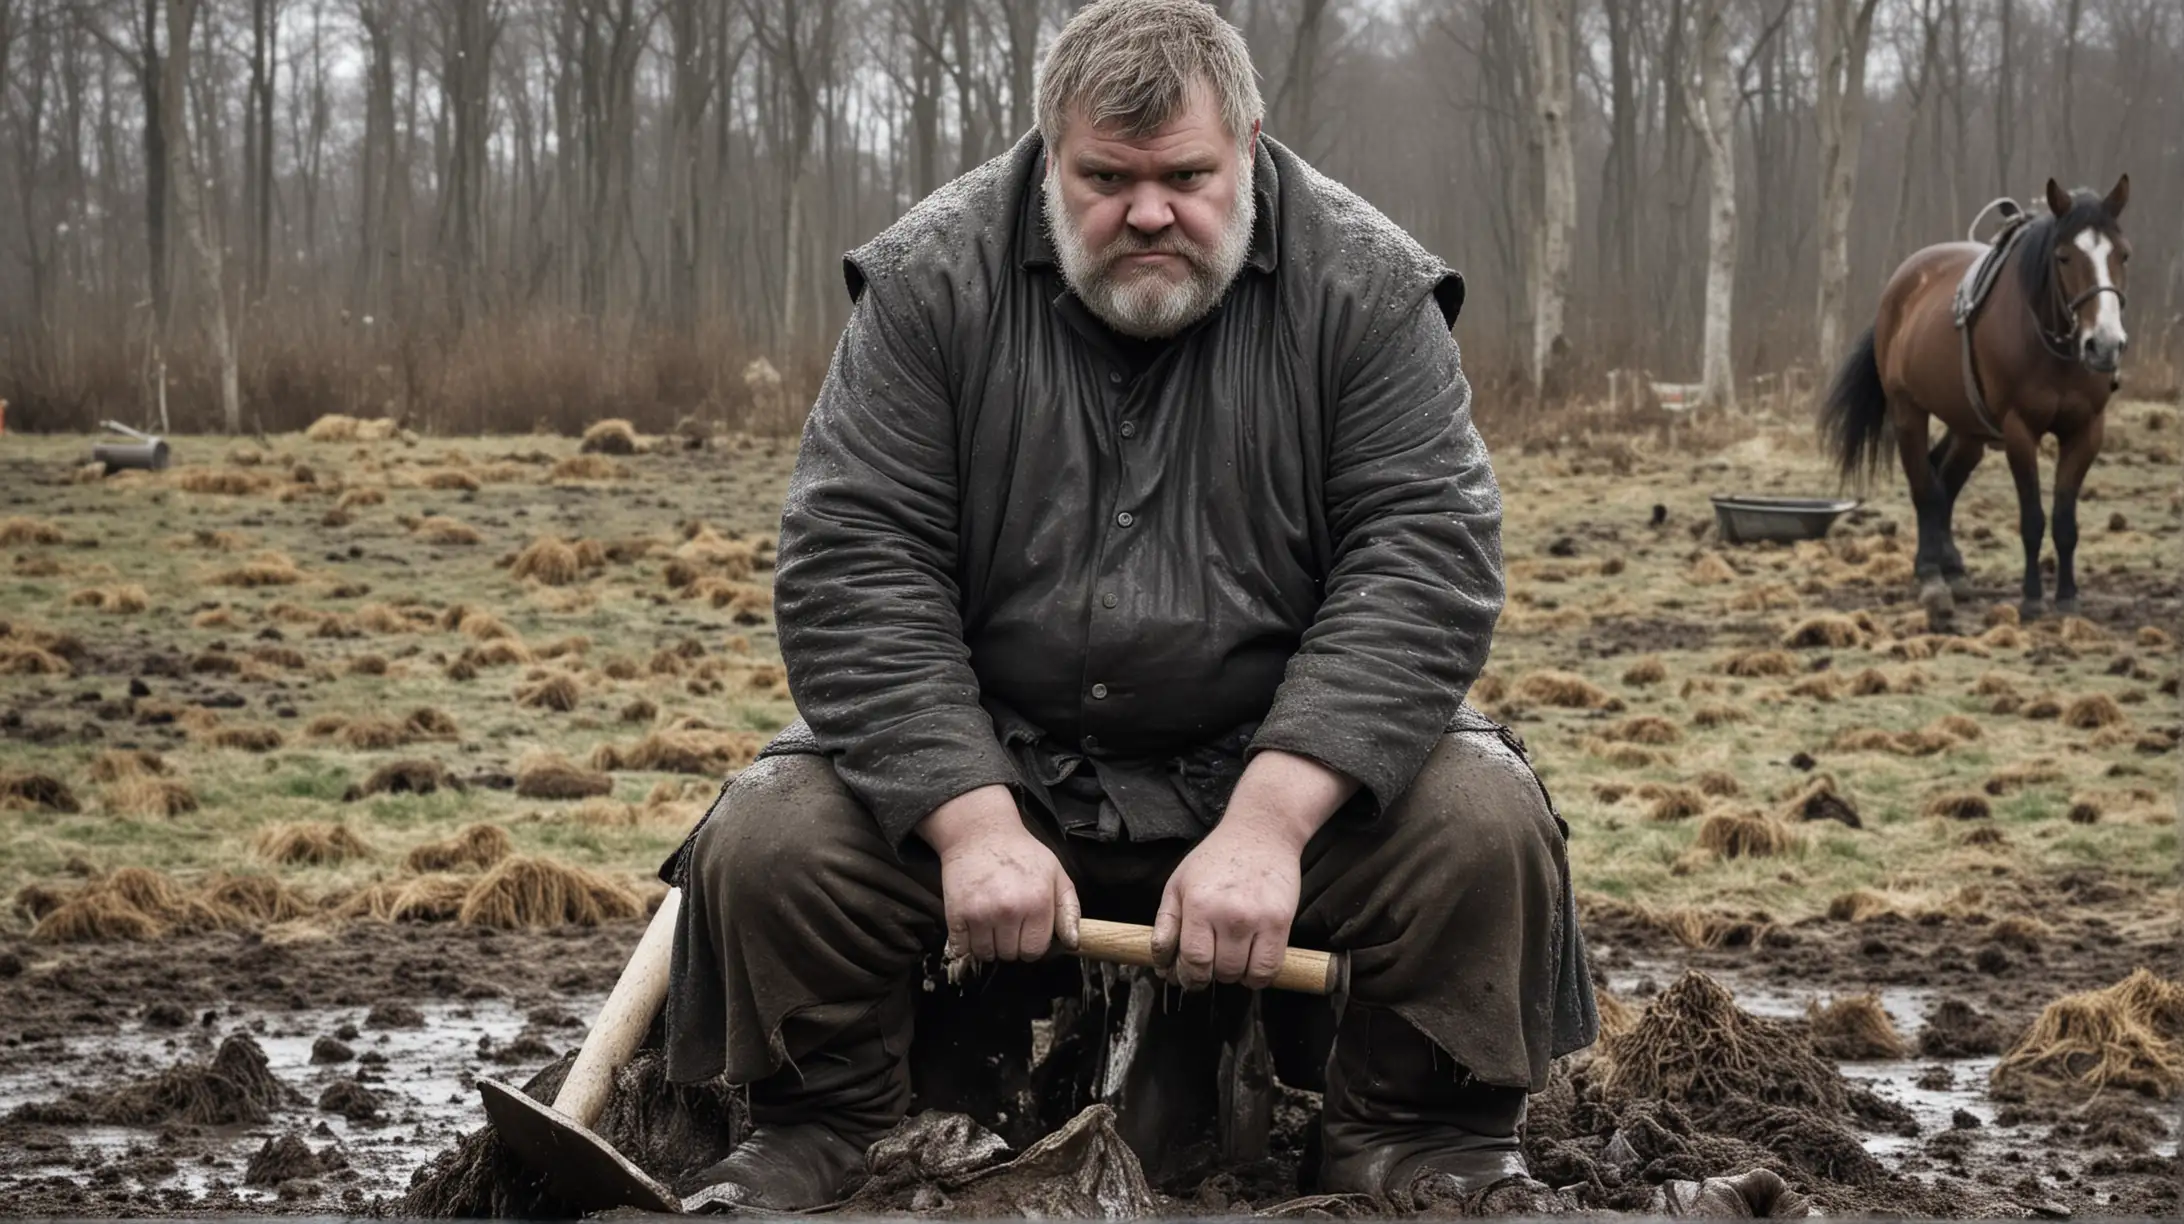 hodor from game of thrones but with dark hair, shoveling horse poop